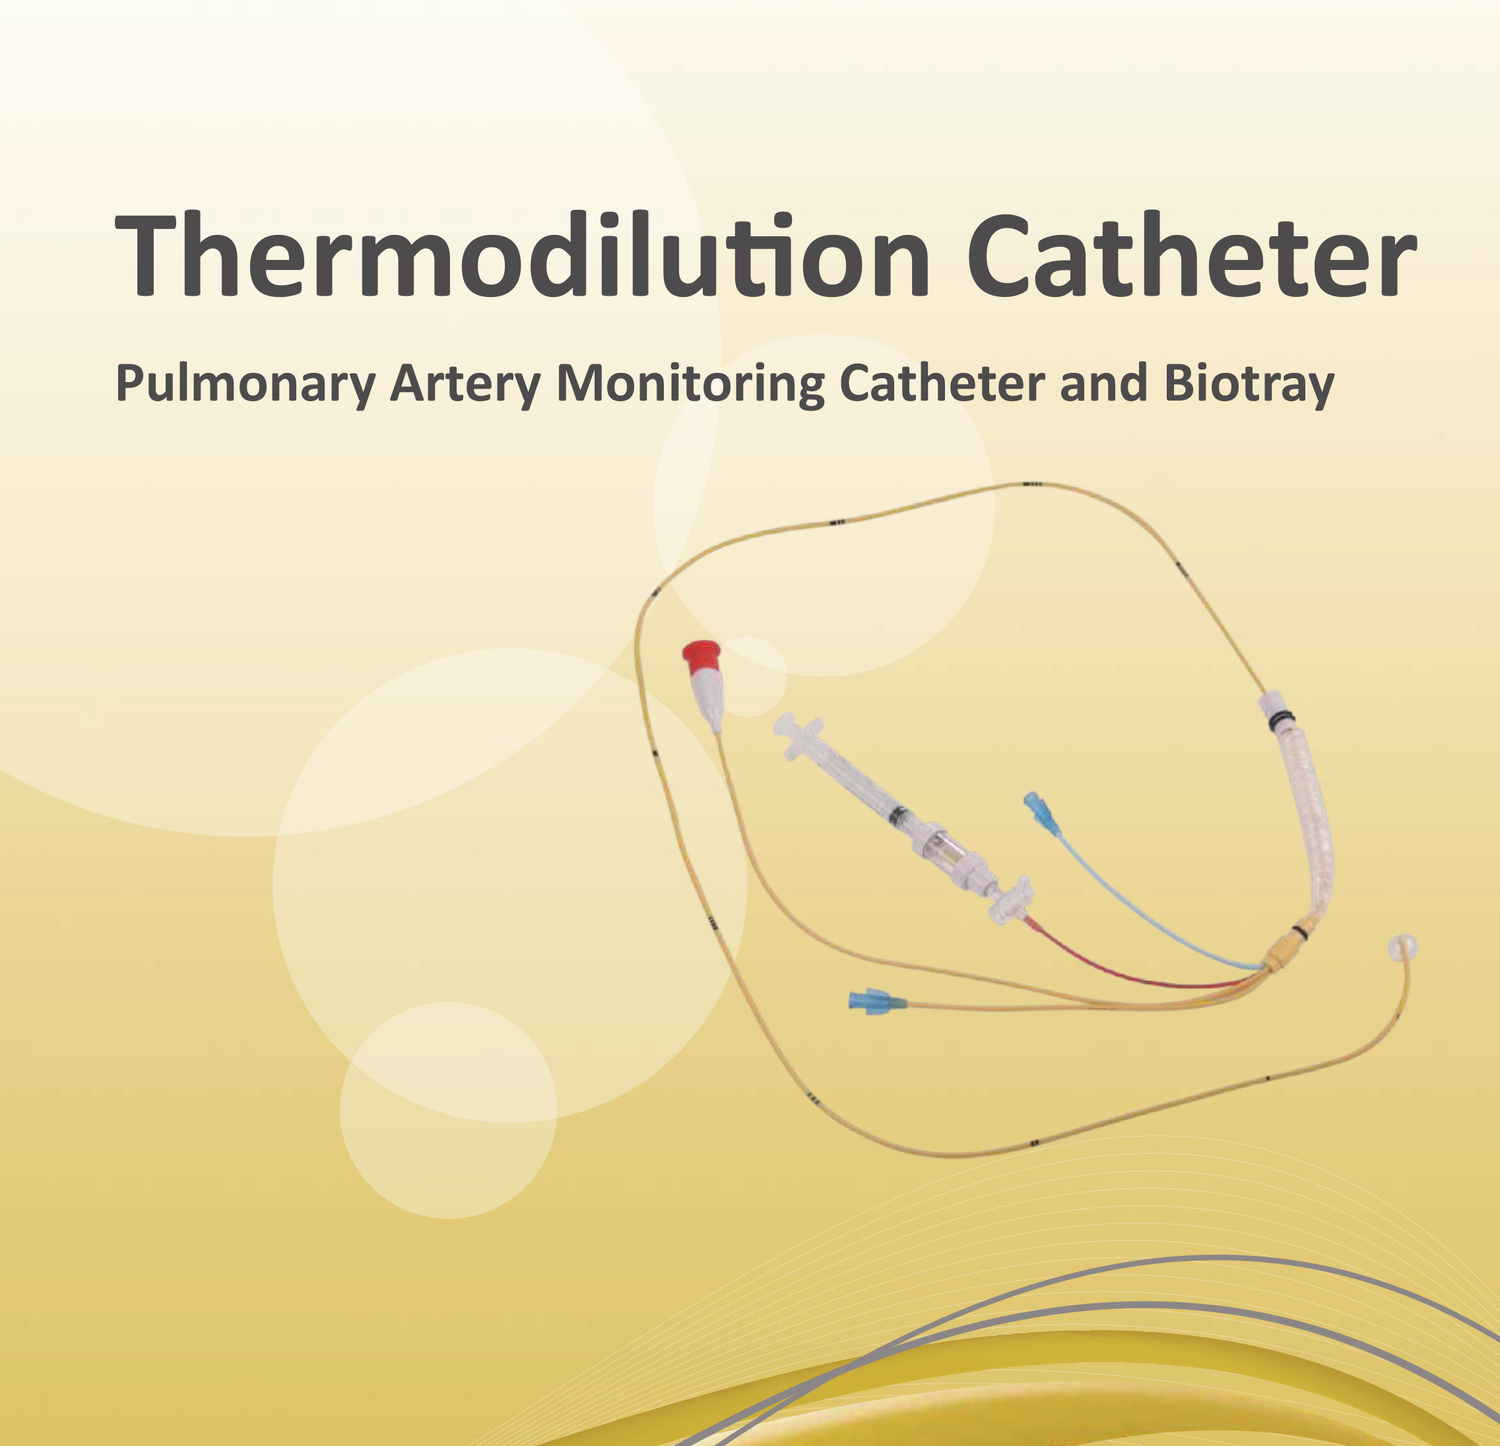 <p><span style="font-weight: bold;">Thermodilution Catheter Pulmonary Artery Monitoring Catheter and Biotray</span><br></p>